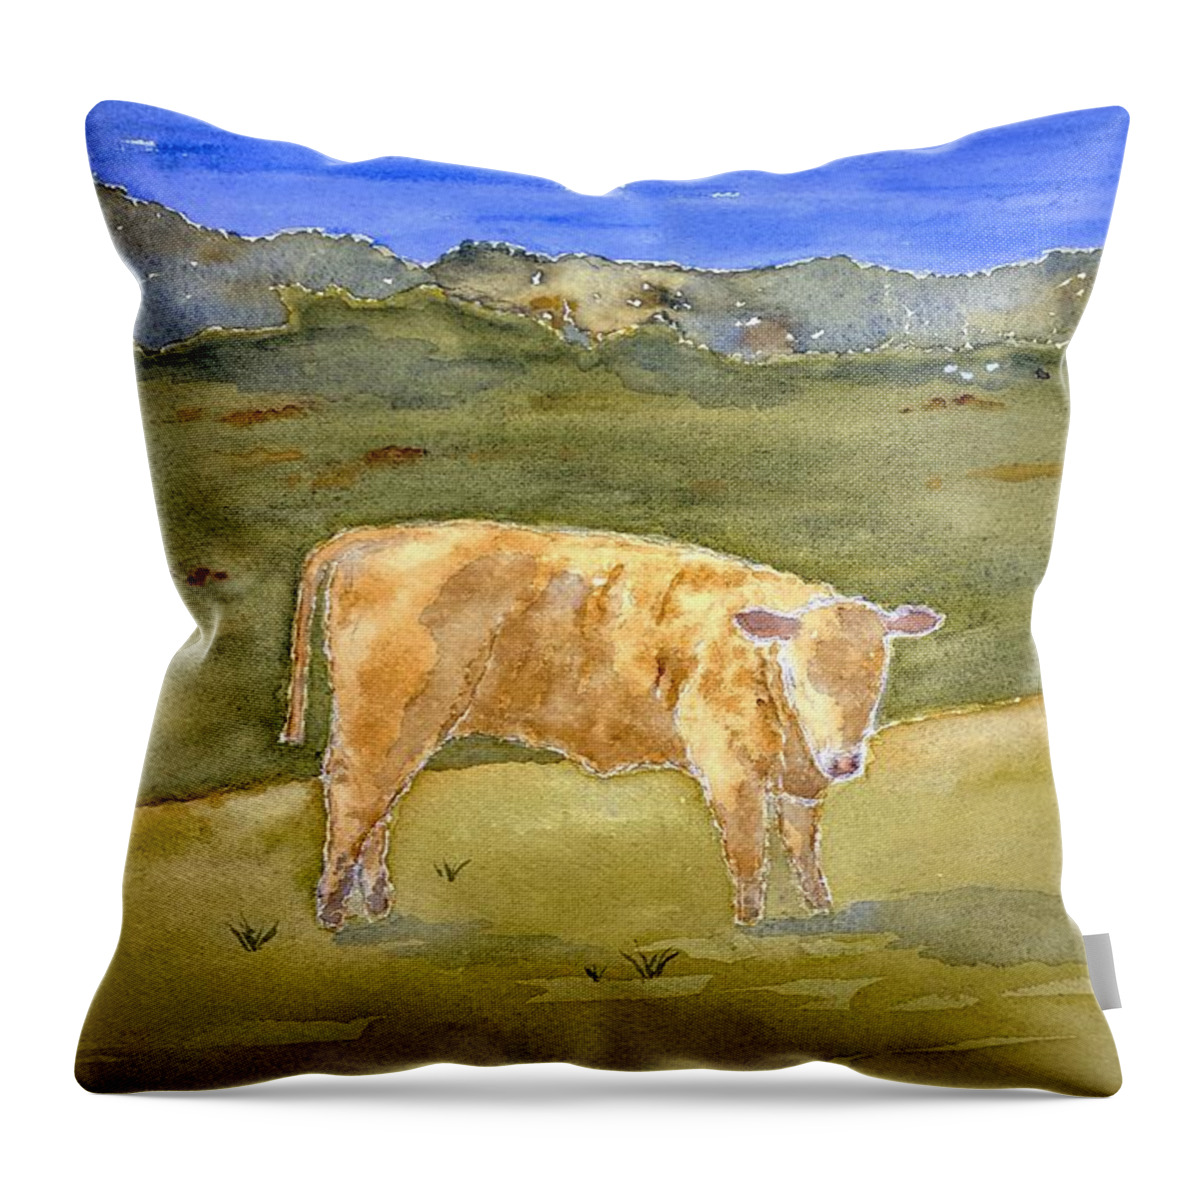 Watercolor Throw Pillow featuring the painting Jersey Lore by John Klobucher